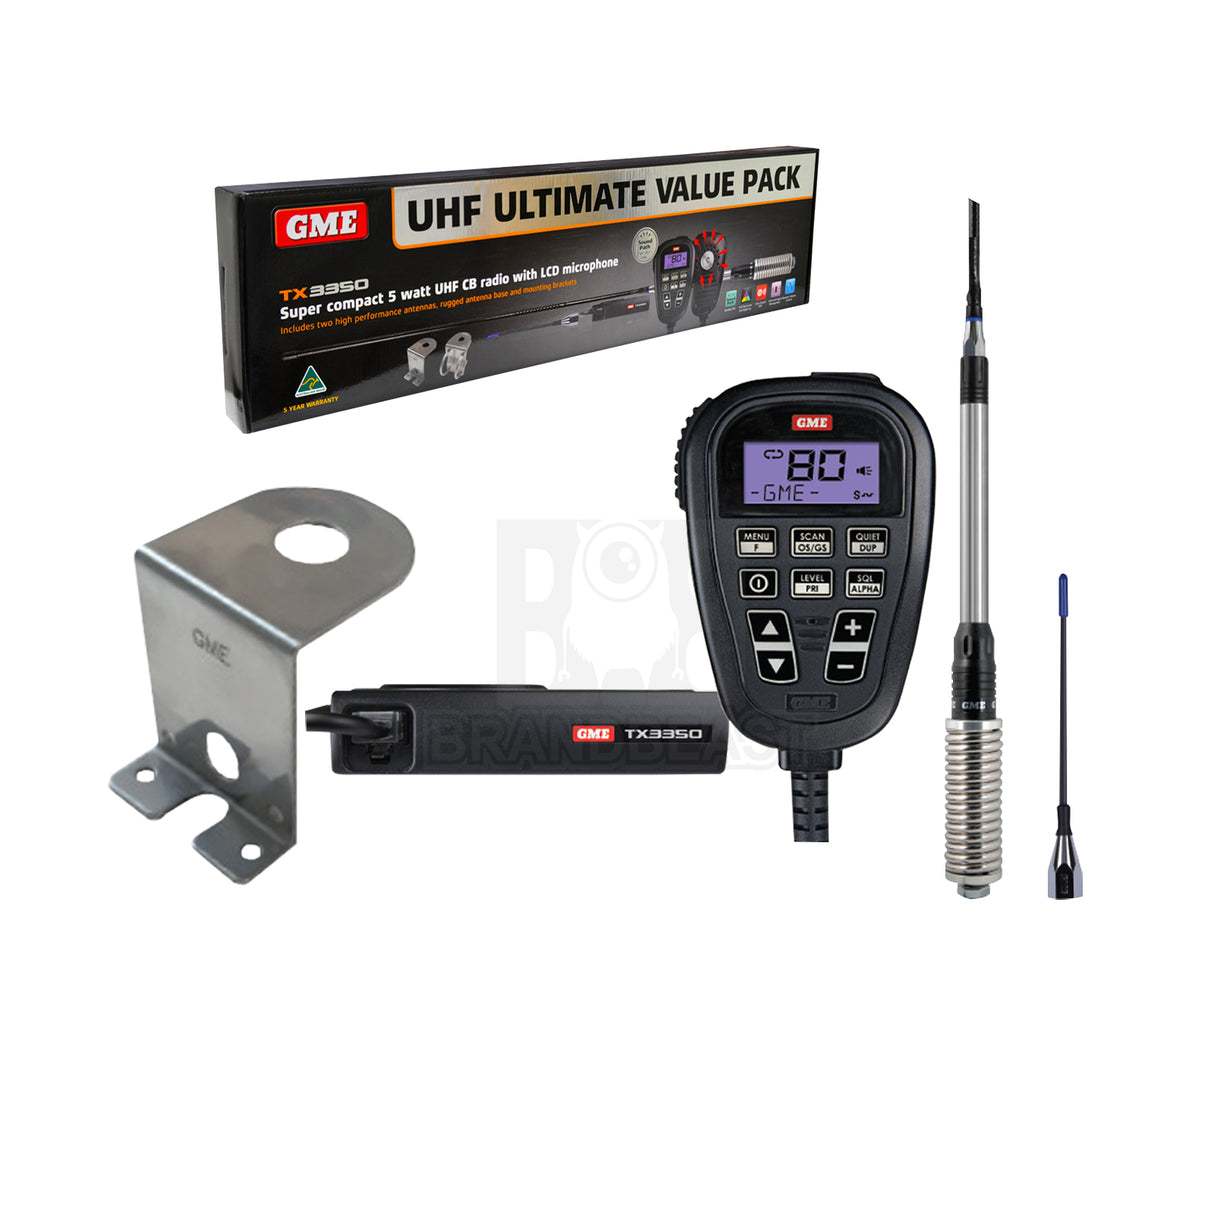 GME TX3350UVP - UHF CB RADIO VALUE PACK WITH SOUNDPATH LCD